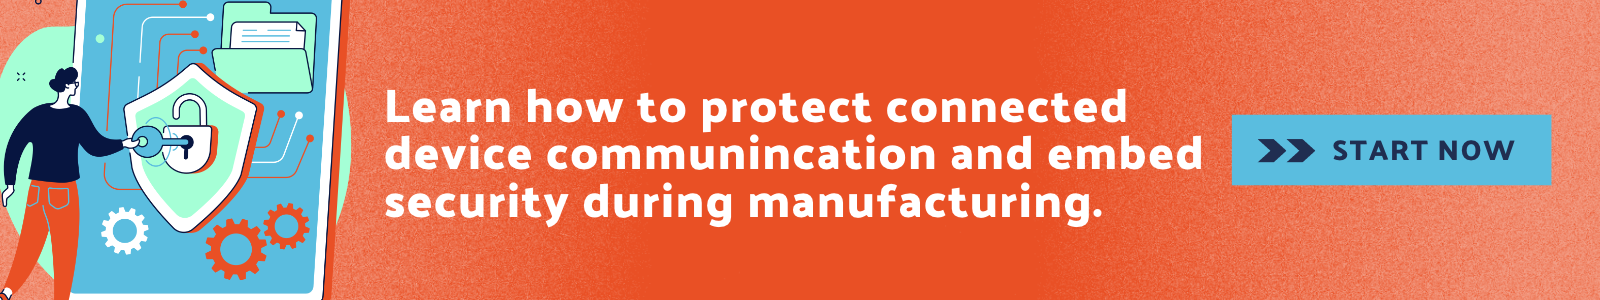 Protect connected device communnication